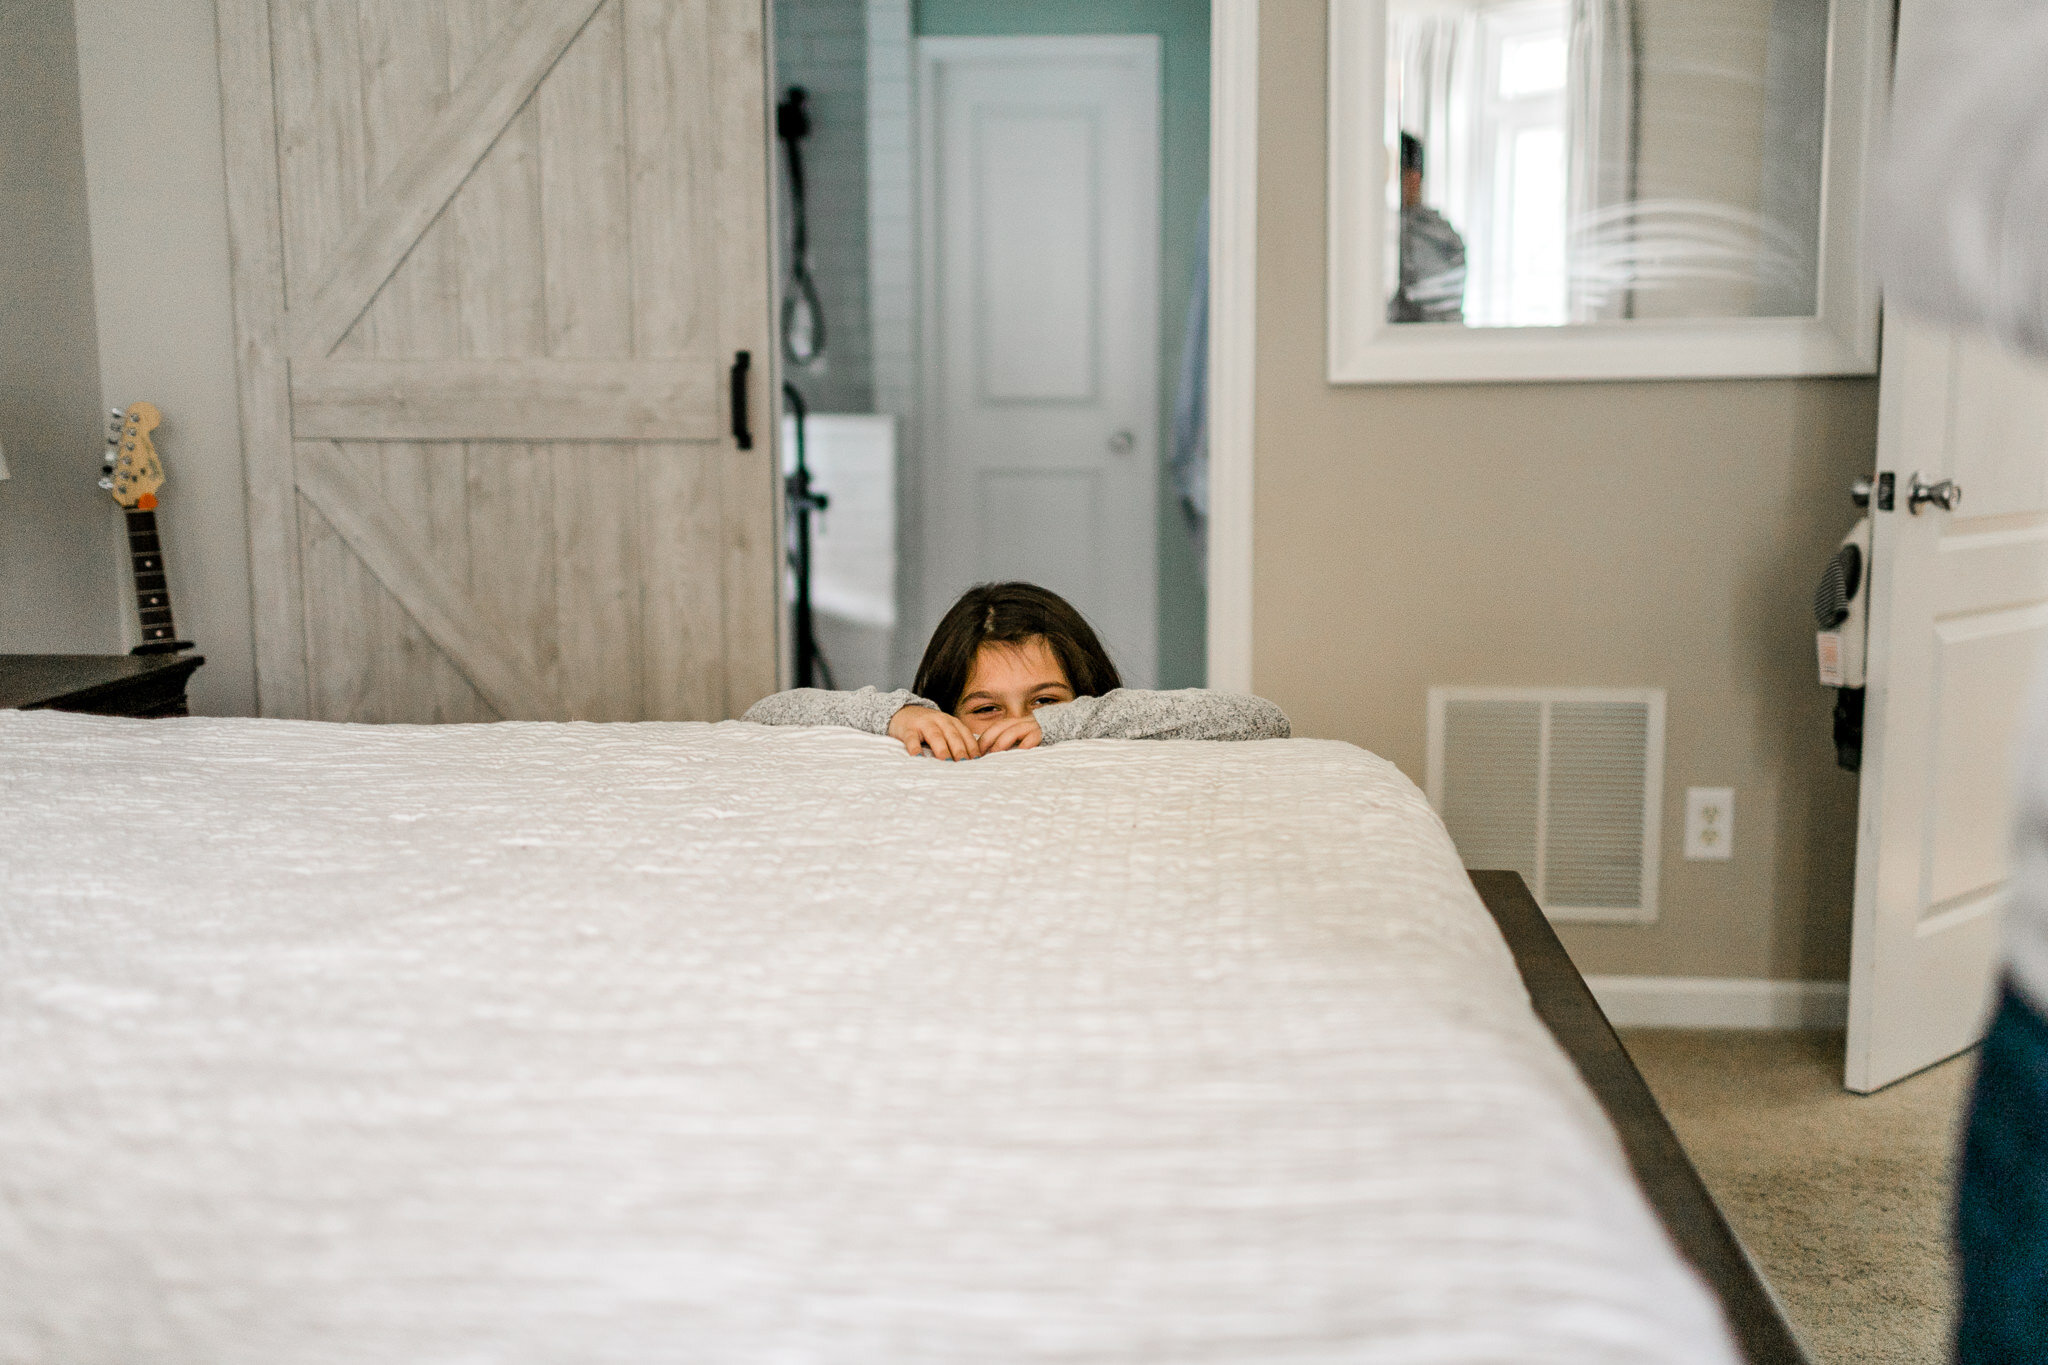 Lifestyle Newborn Session at Home | Raleigh Newborn Photographer | By G. Lin Photography | Girl peeking over bed